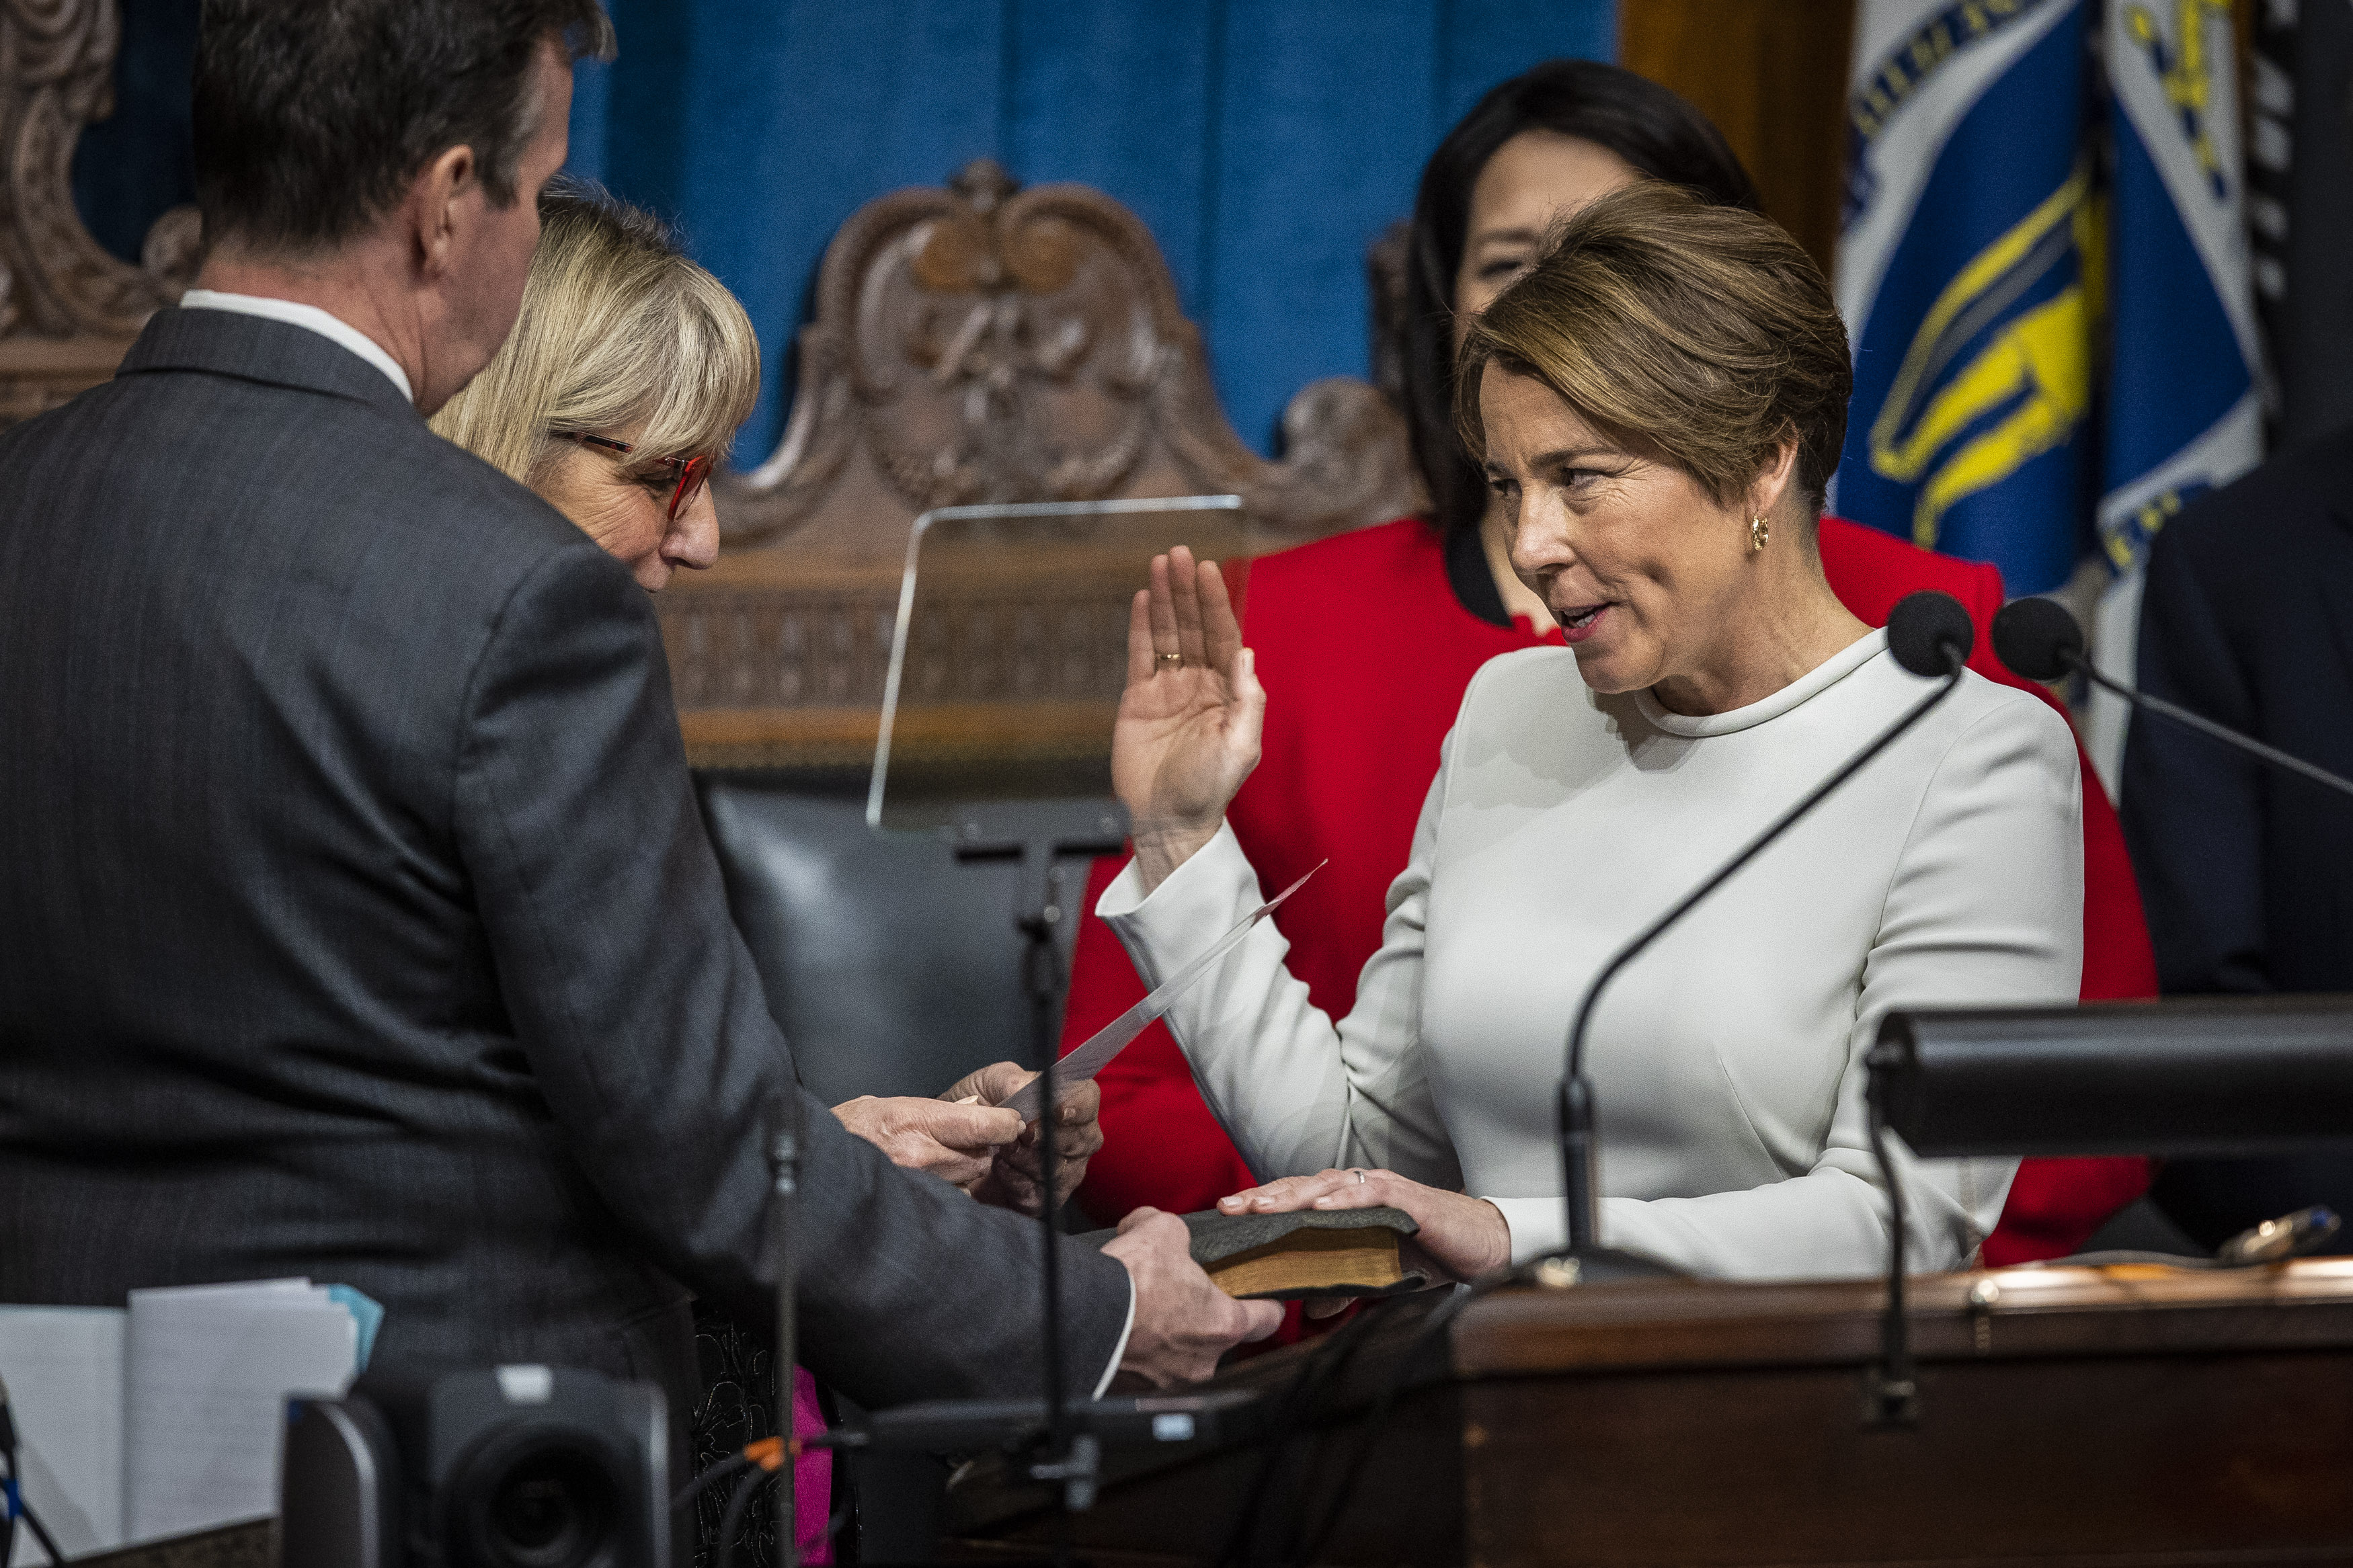 Maura Healey holds her hand on her family bible while being sworn into office by Senate Clerk Michael D. Hurley and Senate President Karen Spilka as Massachusetts' 73rd governor, making history as the first woman ever elected to the post and one of the nations first openly lesbian governors.